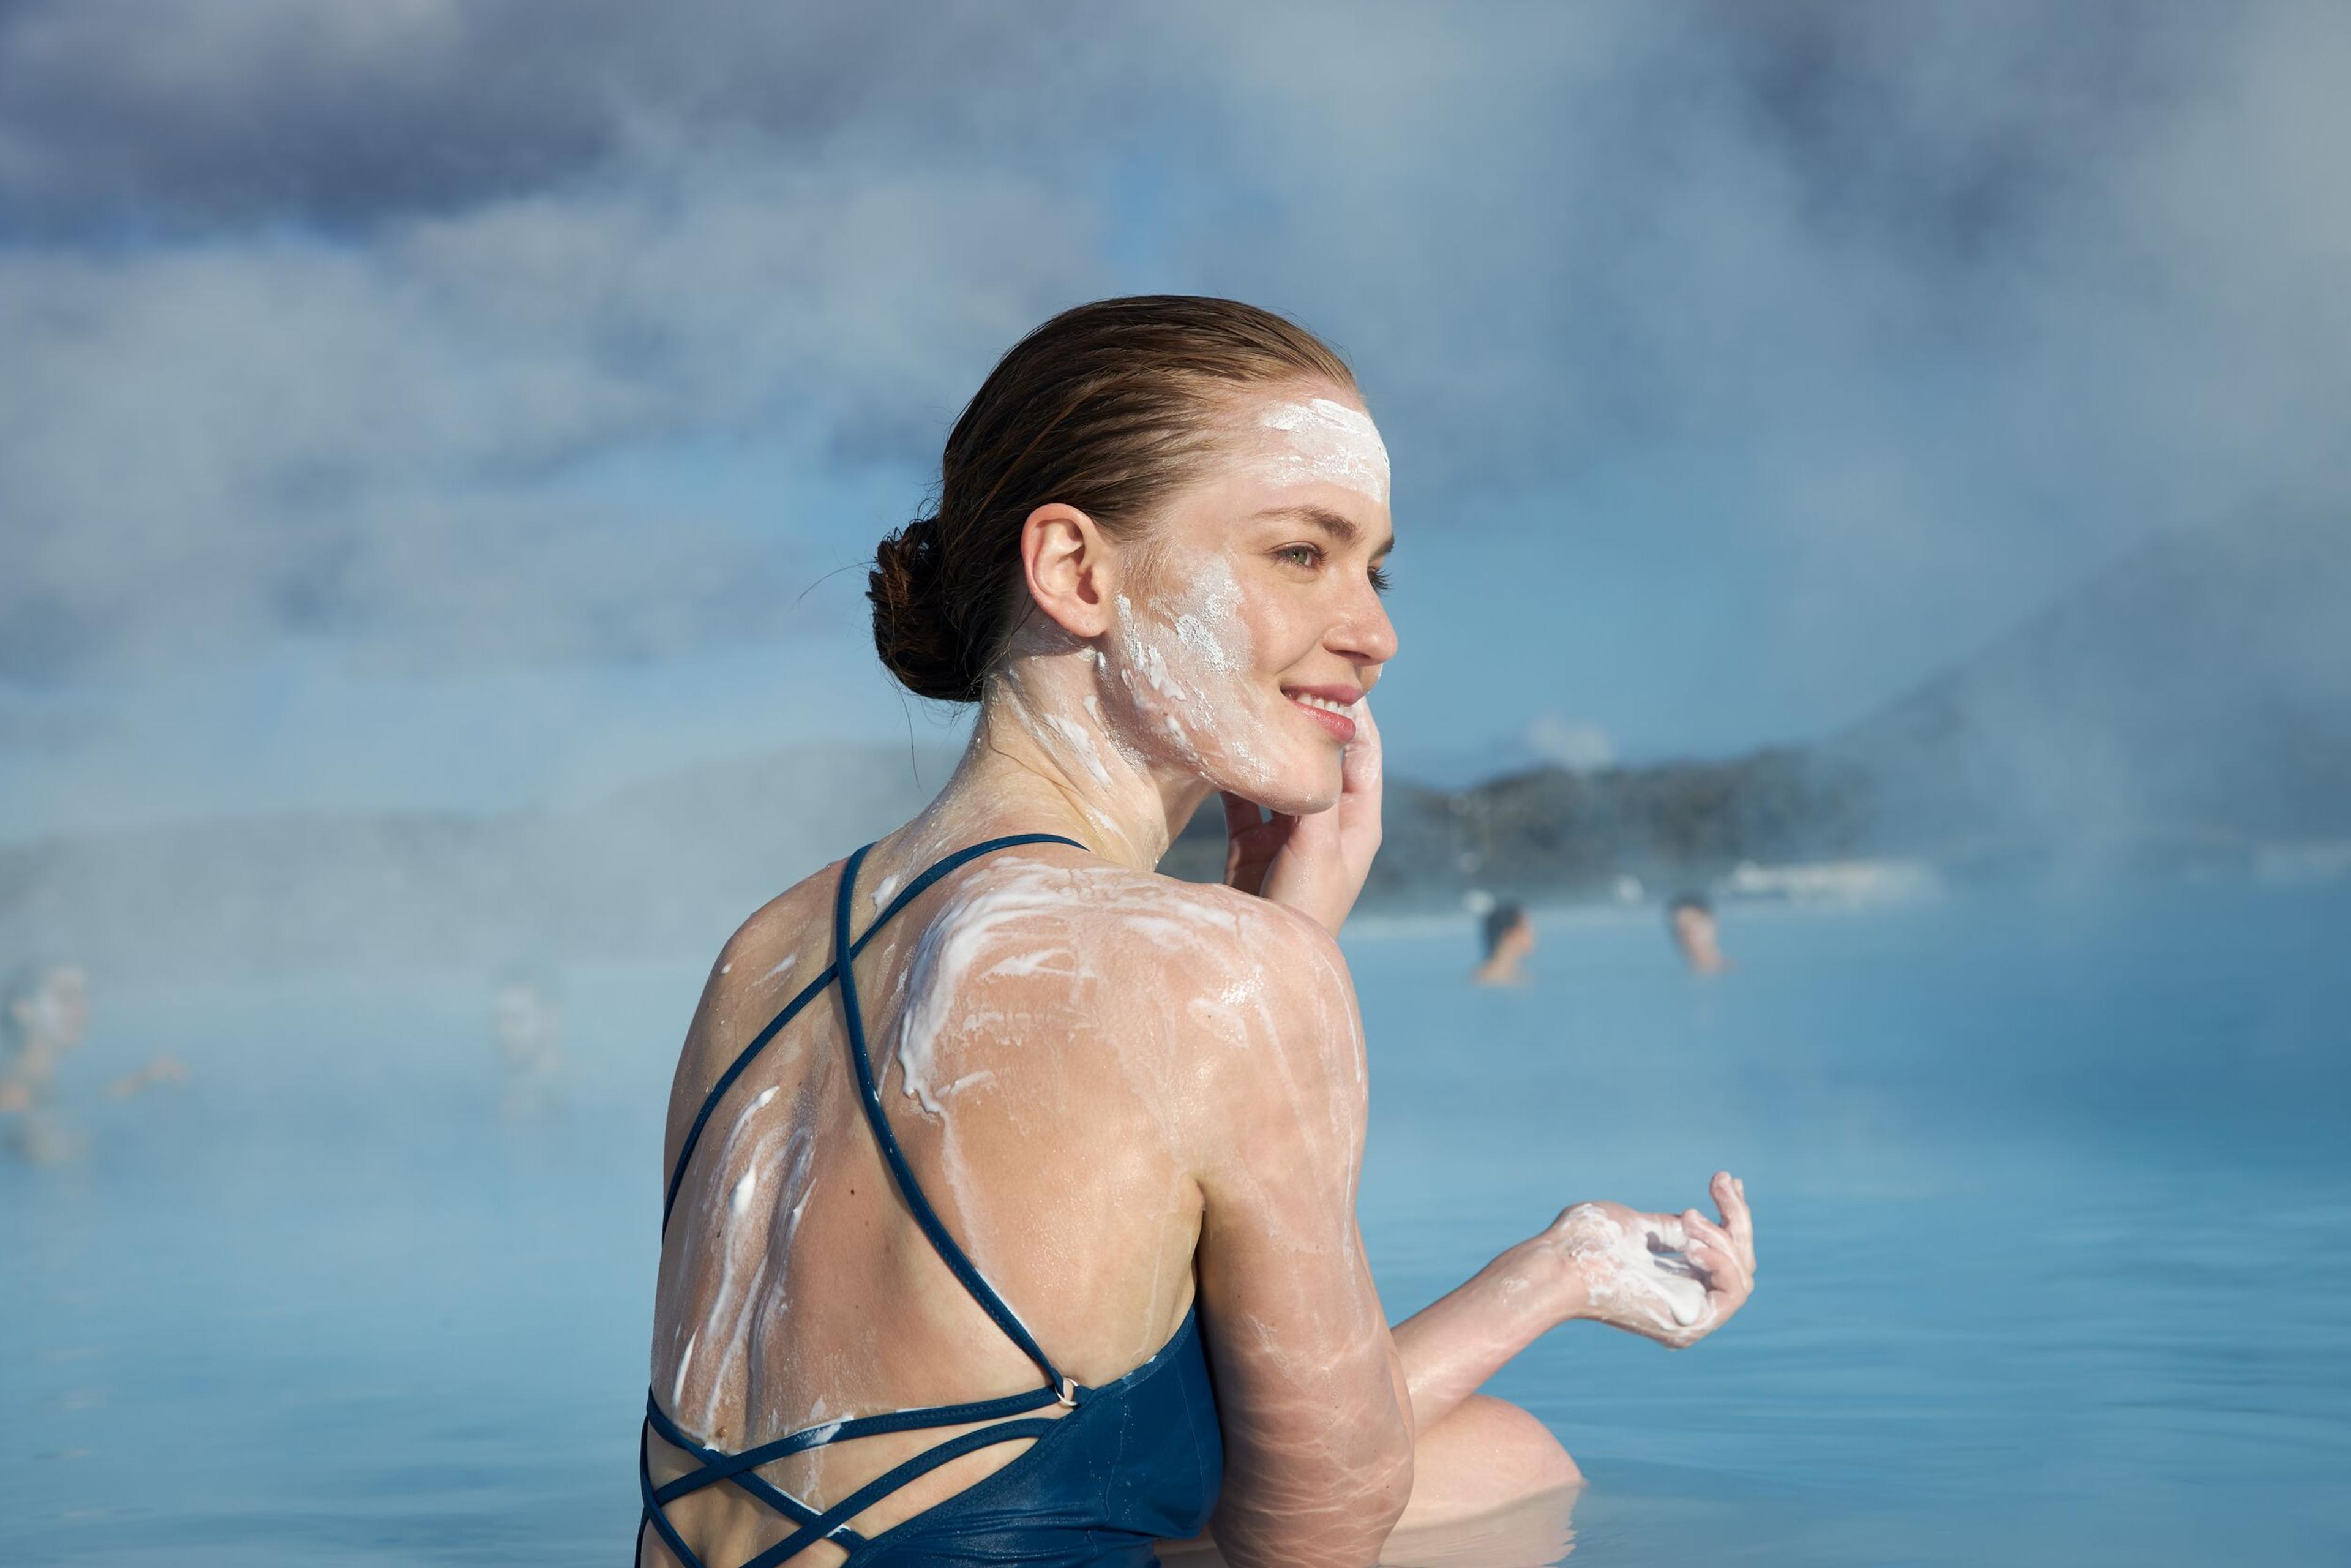 A woman using silica mud treatment by the water at Blue Lagoon, Iceland.